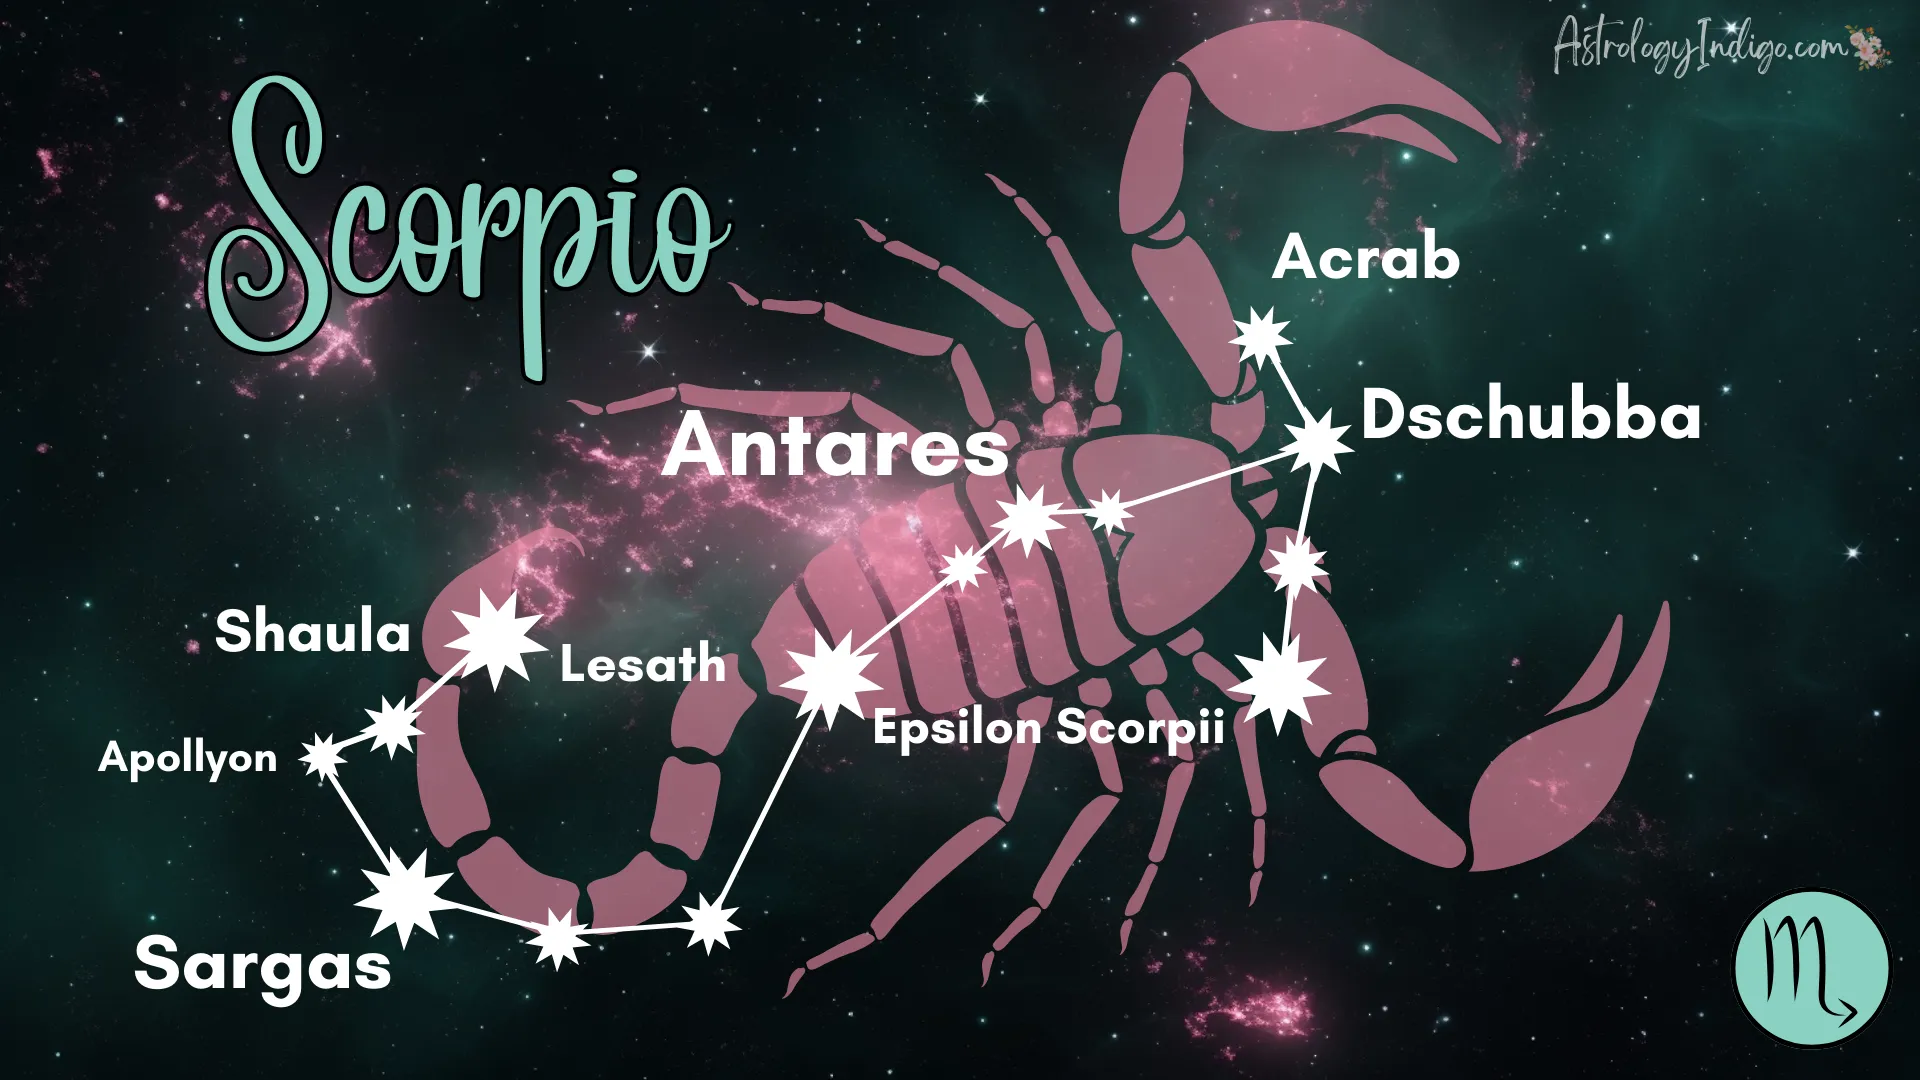 The Scorpio constellation with information about the stars and a pink image of a Scorpion behind it.